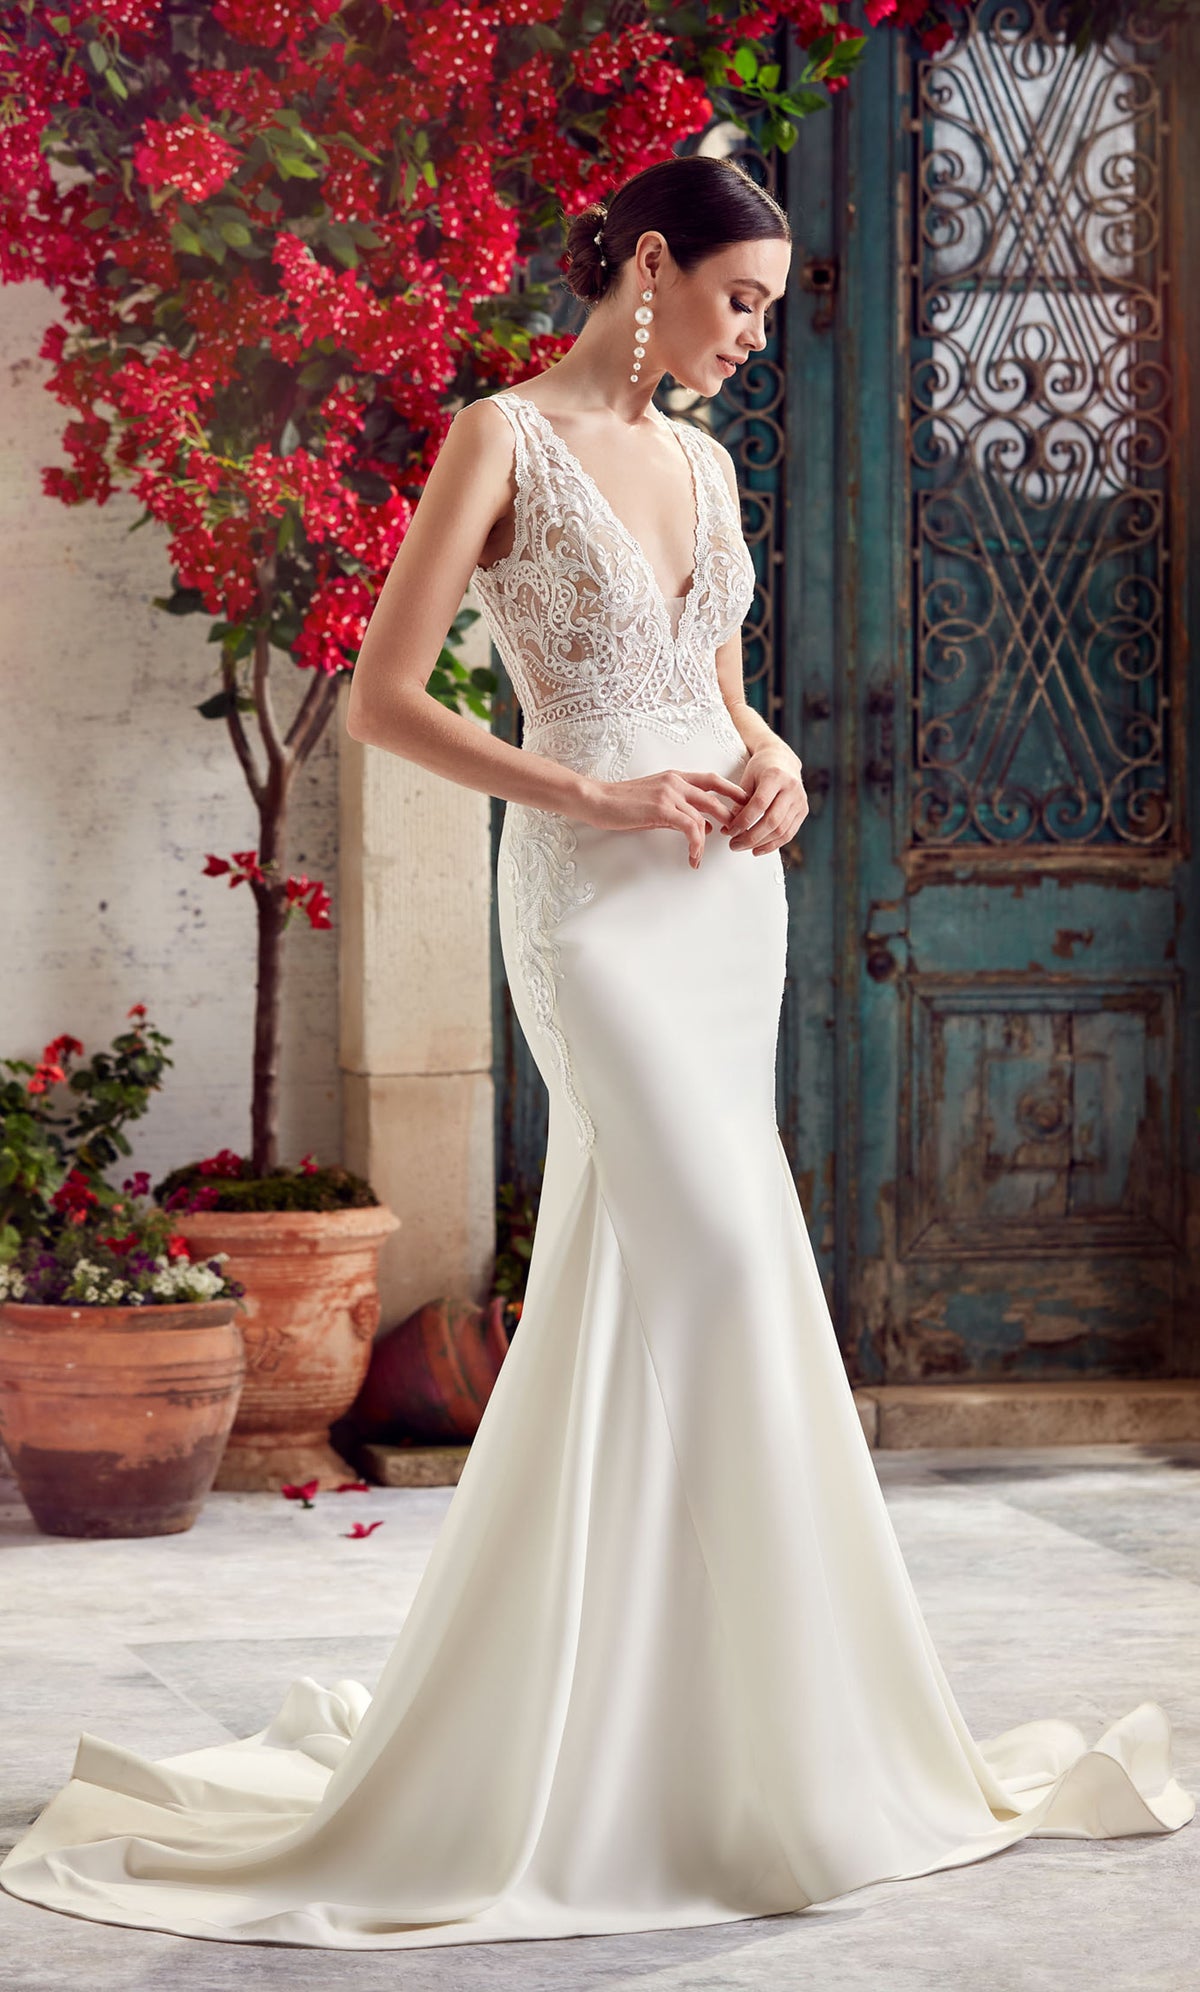 Wedding Dress: 7016. Long, Plunging Neckline, Fit and Flare